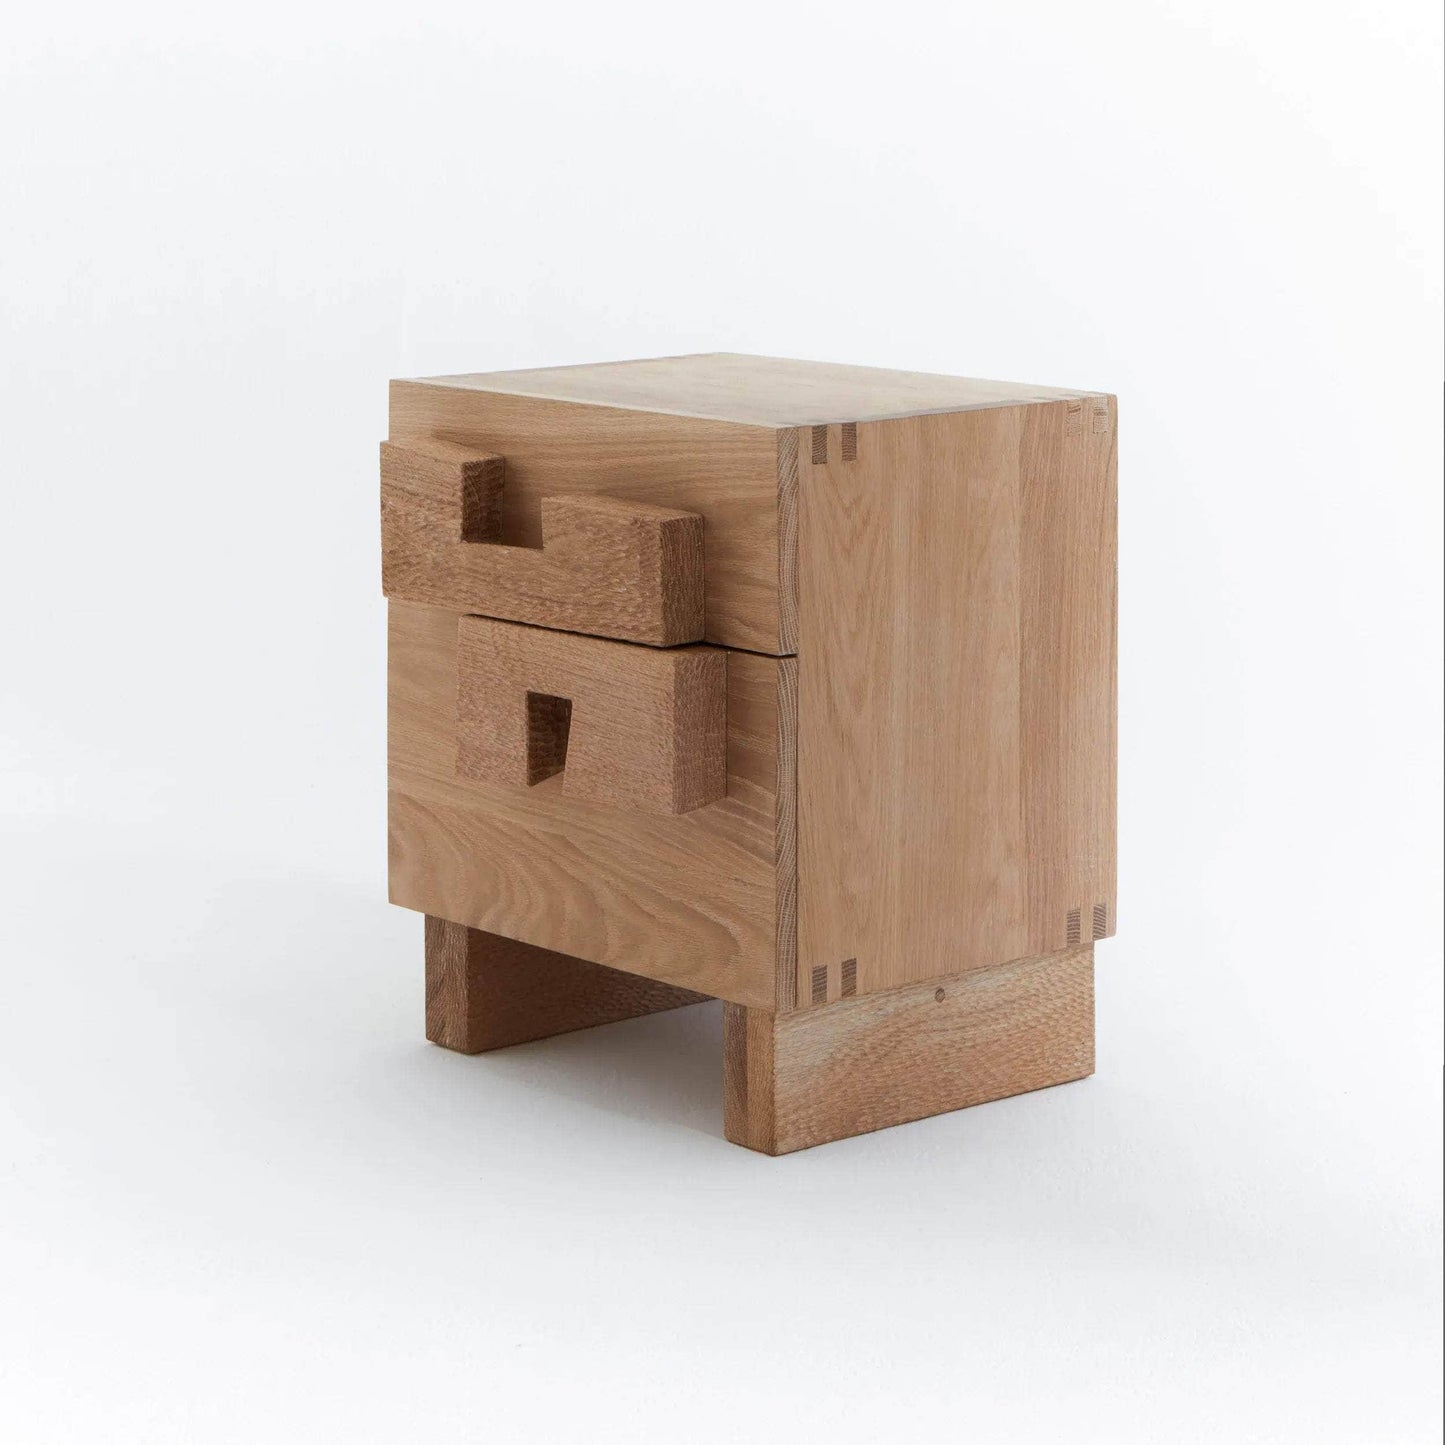 Douro Bedside Table